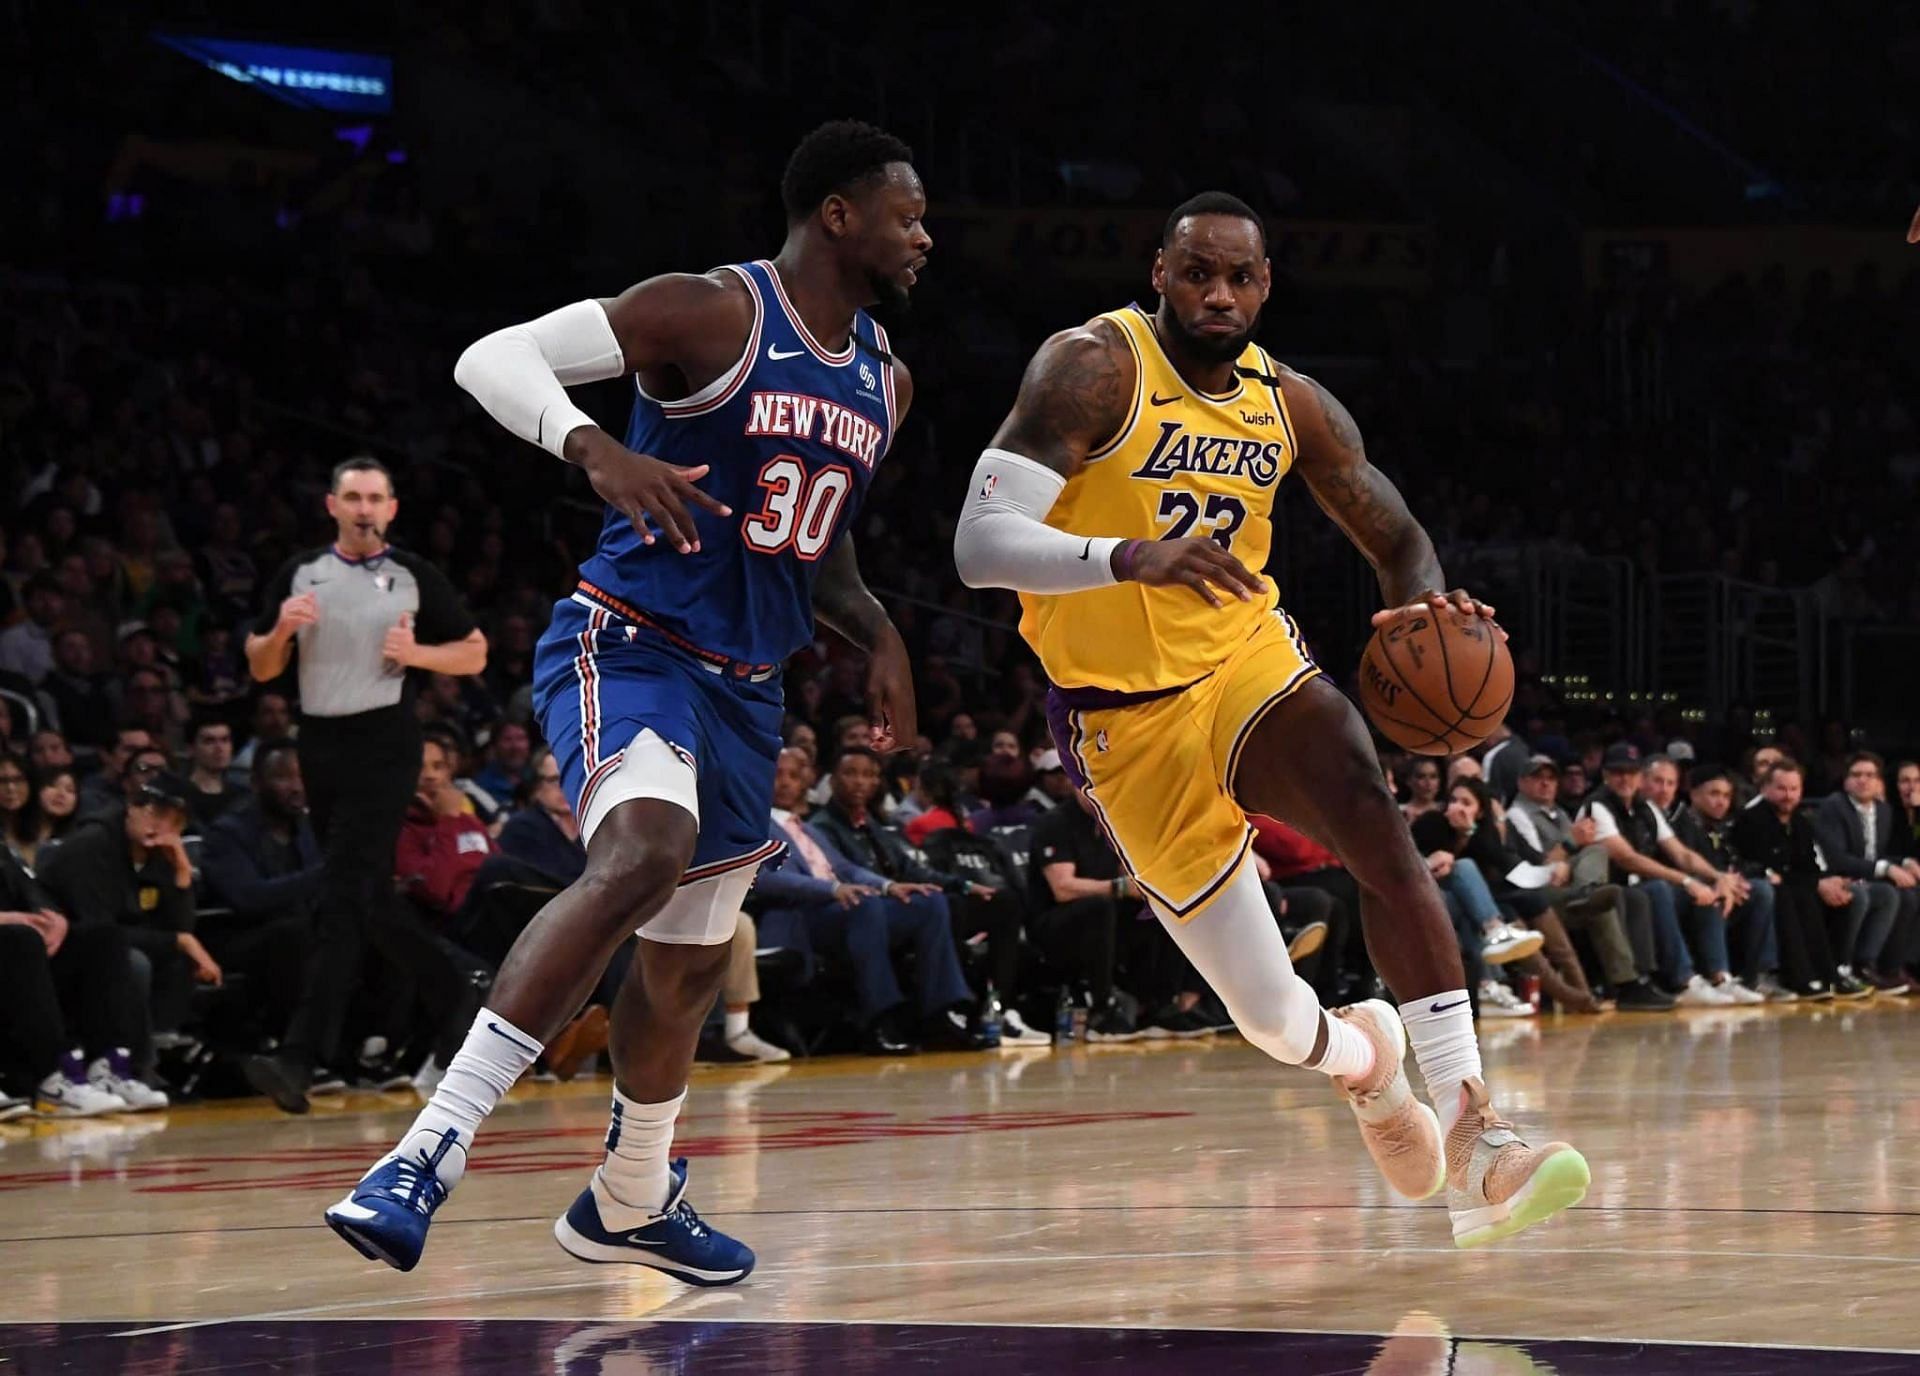 LeBron James had an impressive return from a five-game absence, rallying the LA Lakers past the New York Knicks on national TV [Photo: Elite Sports NY]